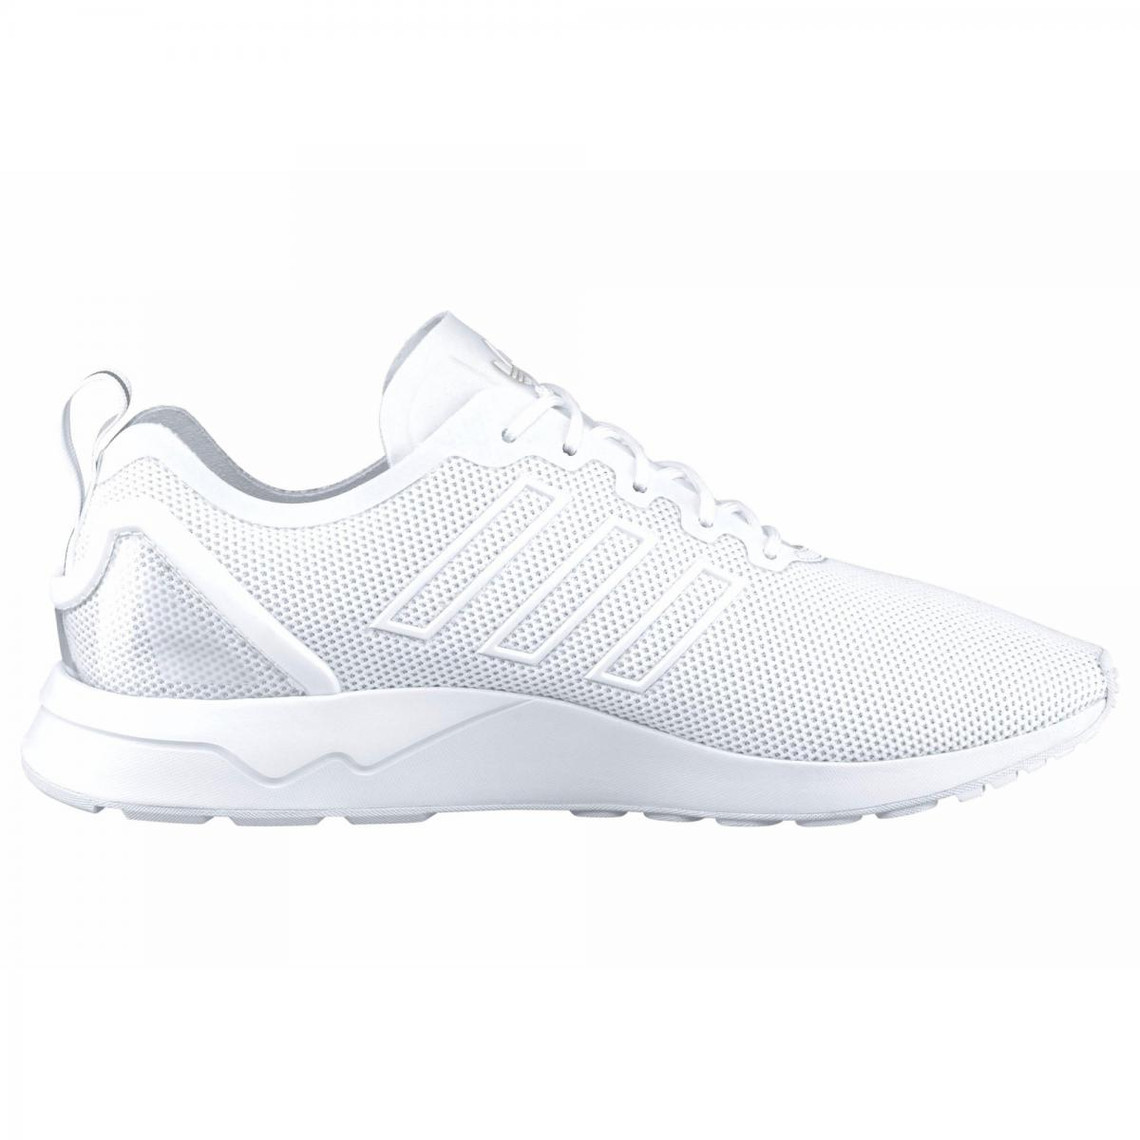 adidas homme chaussures zx flux